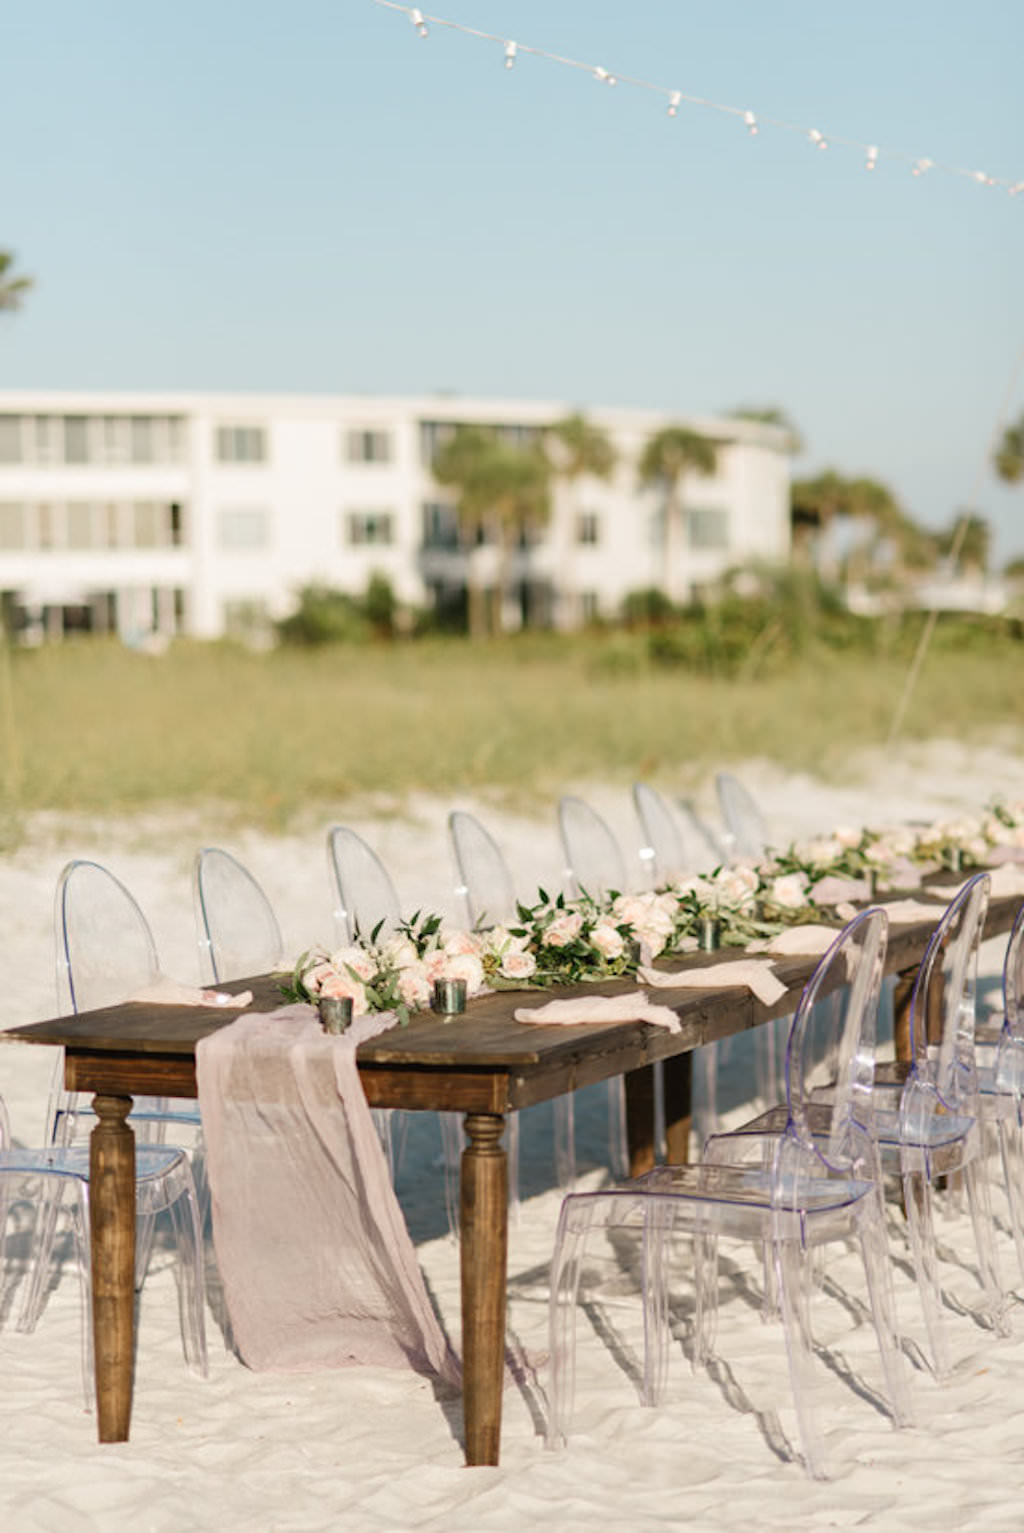 Outdoor Beachfront Wedding Reception with Long Wooden Feasting Table and Ghost Chairs | Resort at Longboat Key Club Sarasota Area Wedding Venue